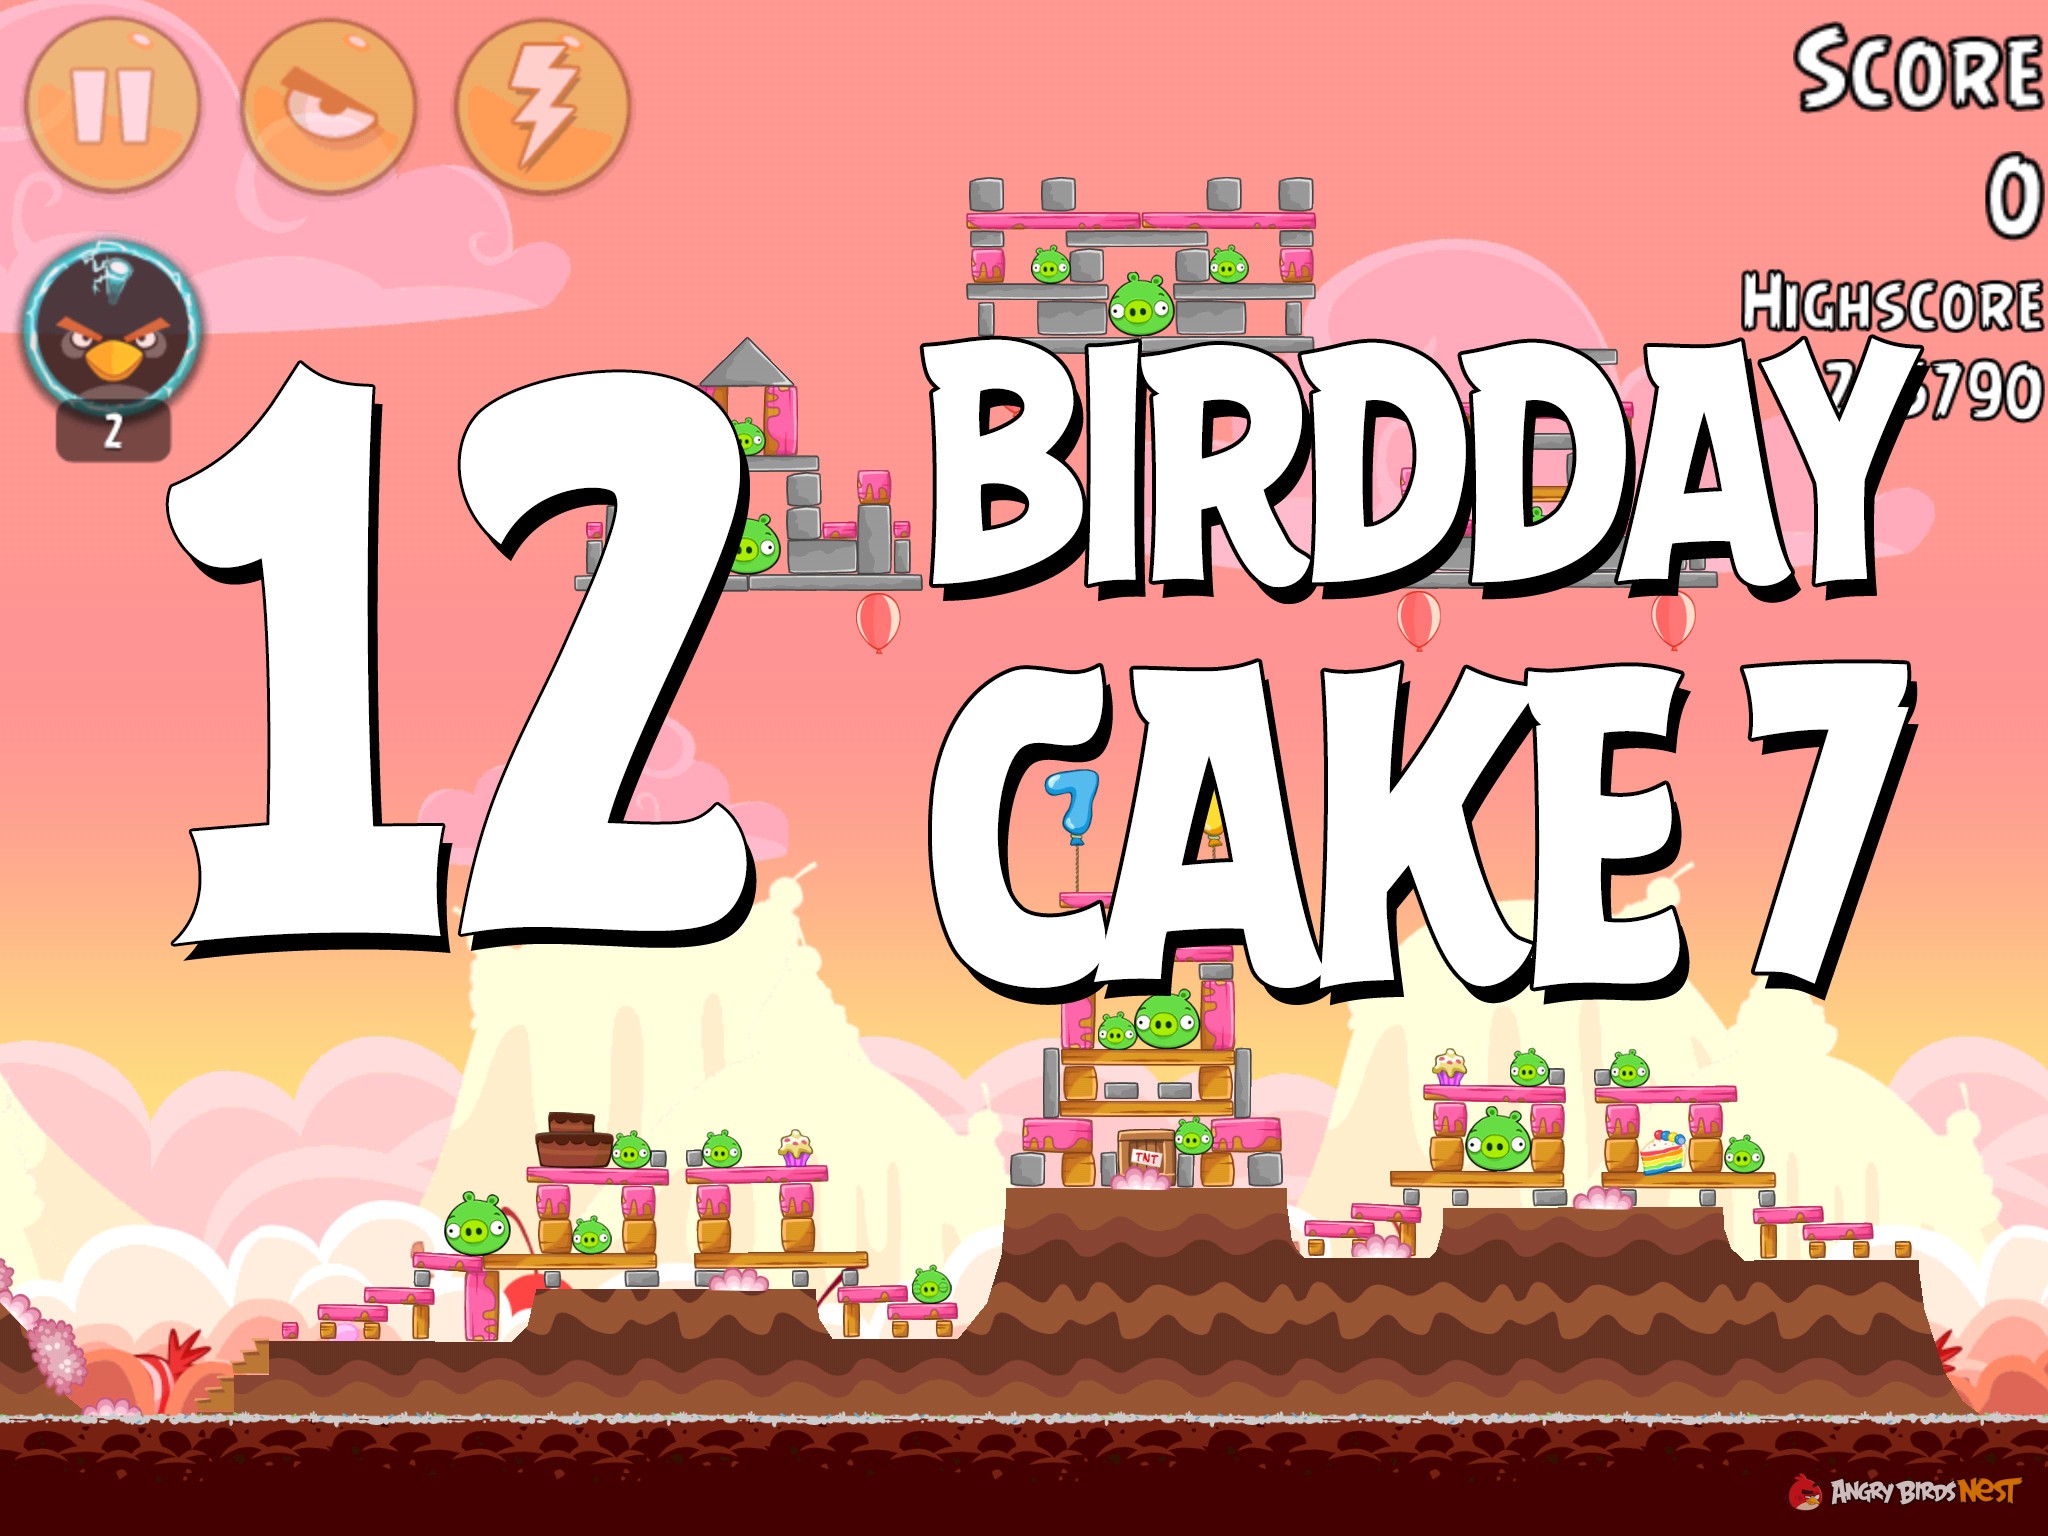 Angry-Birds-Birdday-Party-Cake-7-Level-12